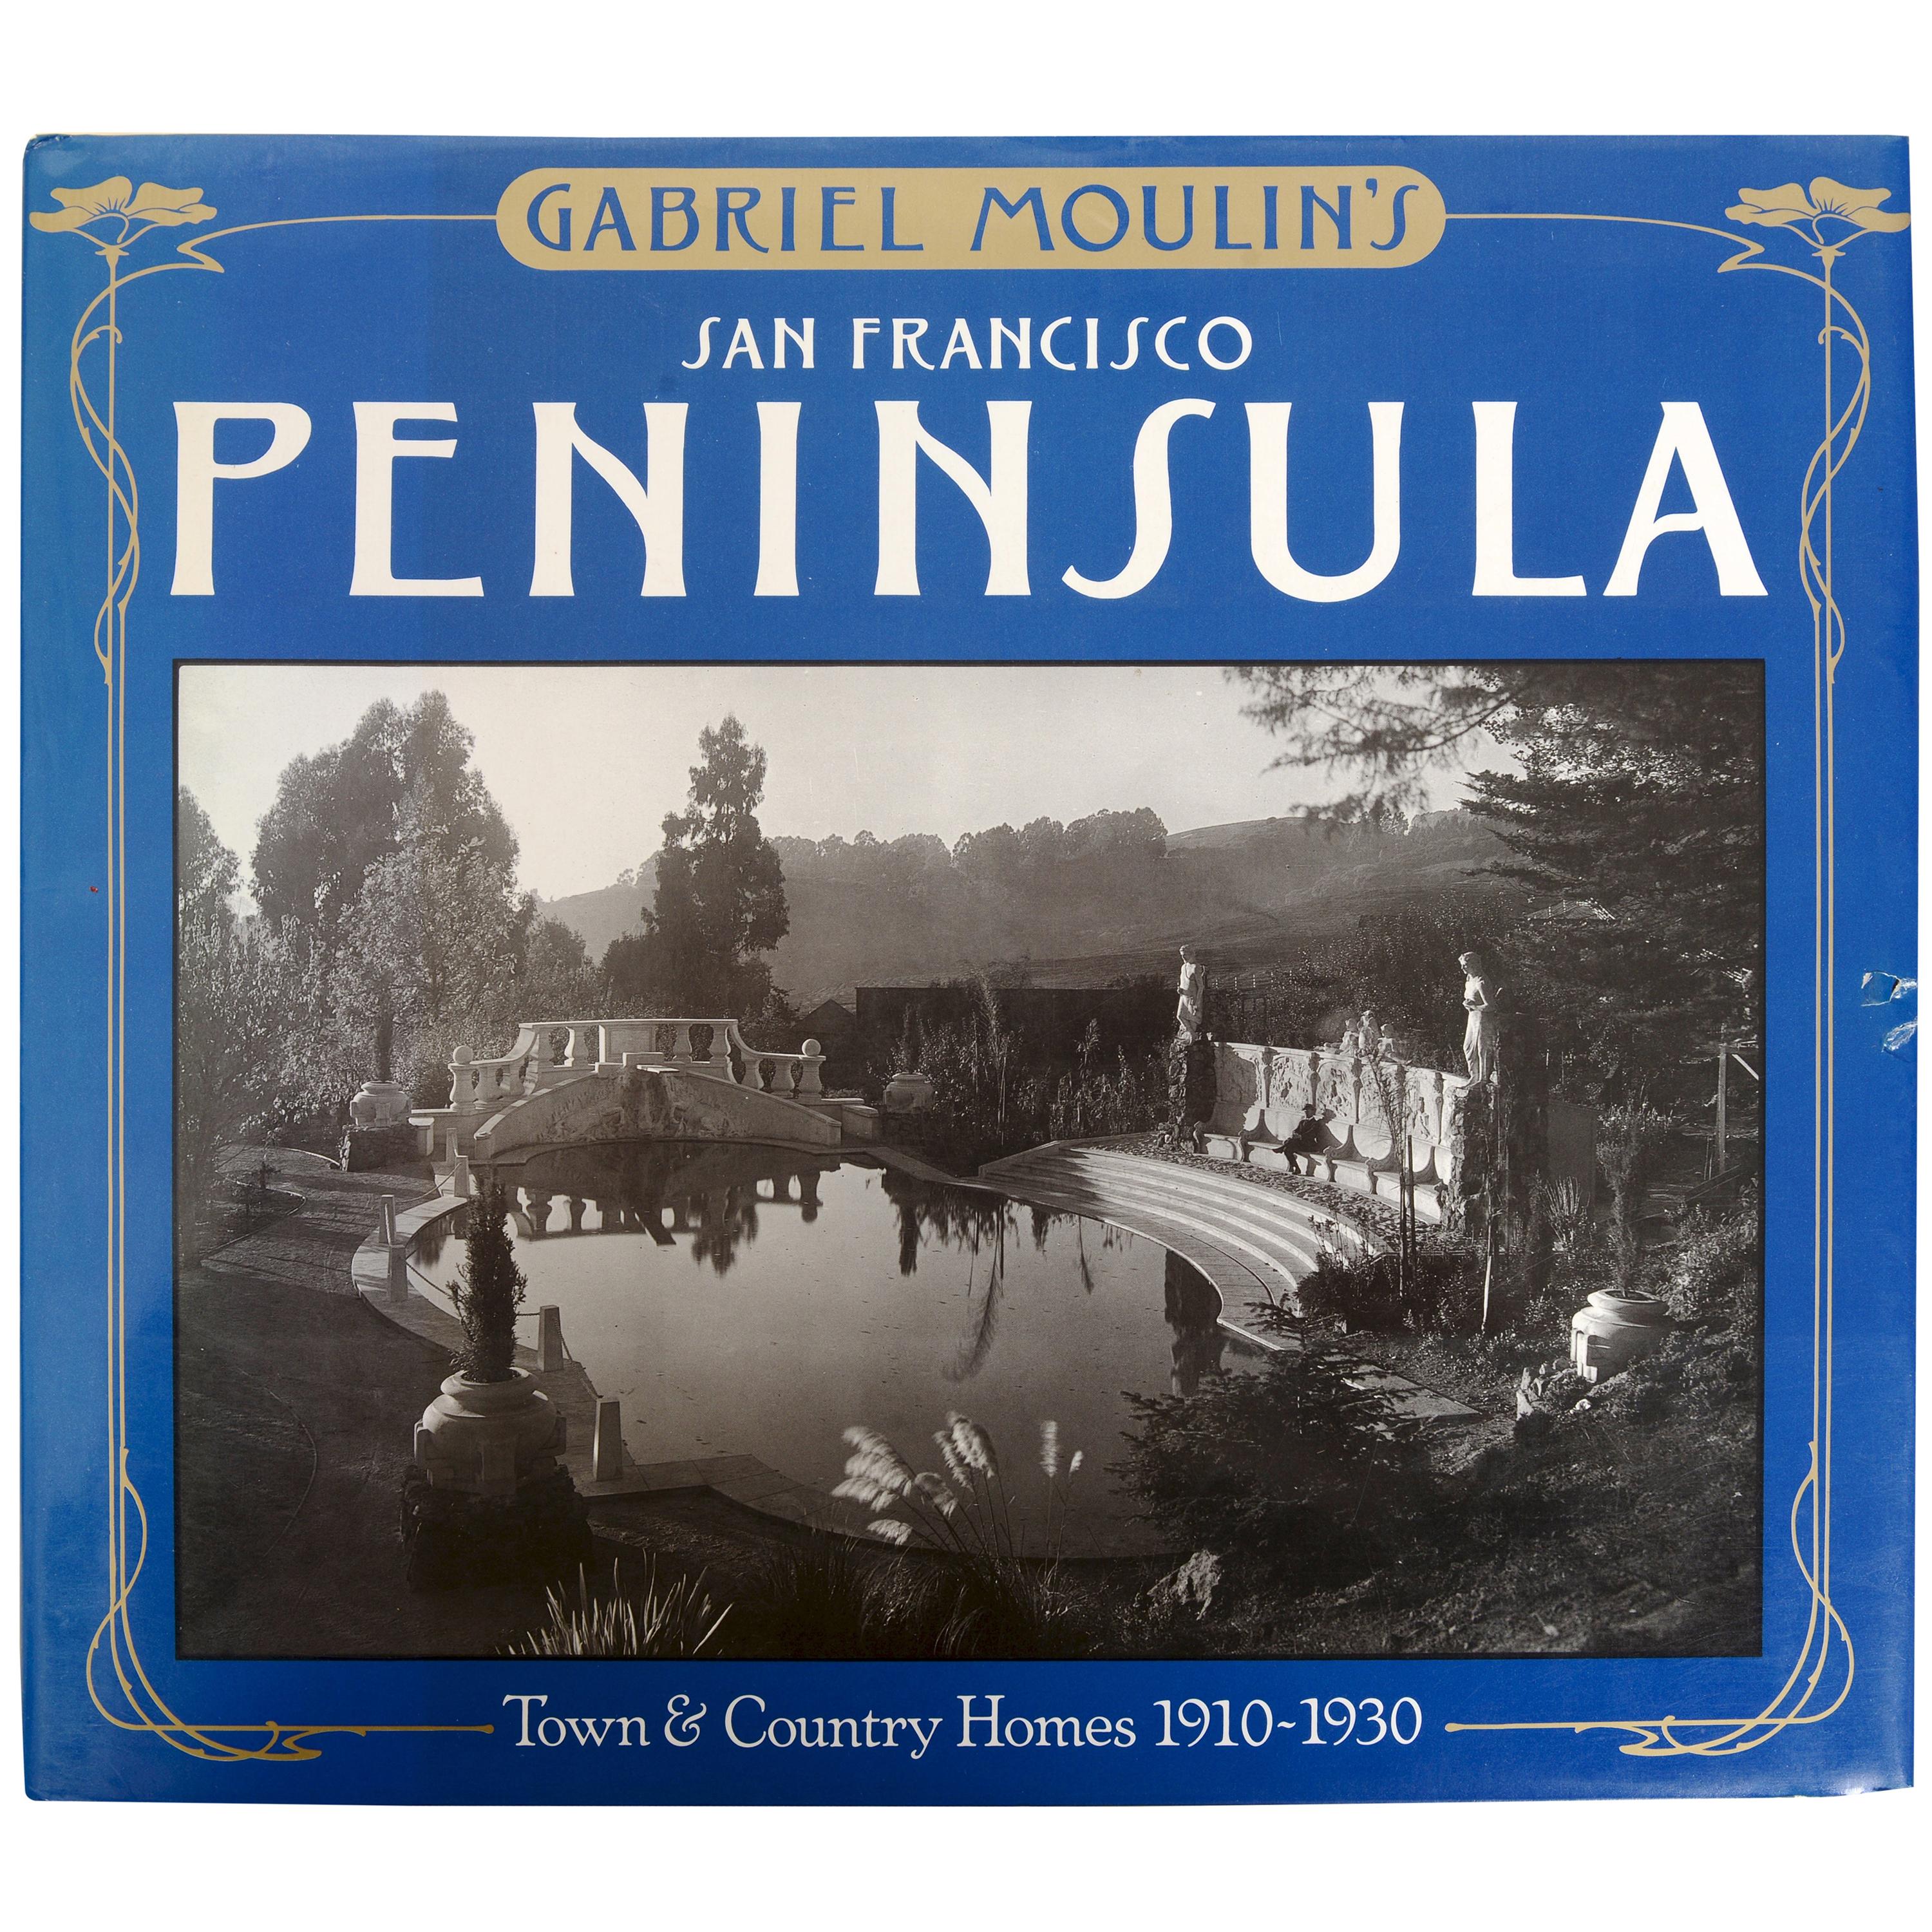 Gabriel Moulin's San Francisco Peninsula: Town & Country Homes, 1910-1930 For Sale